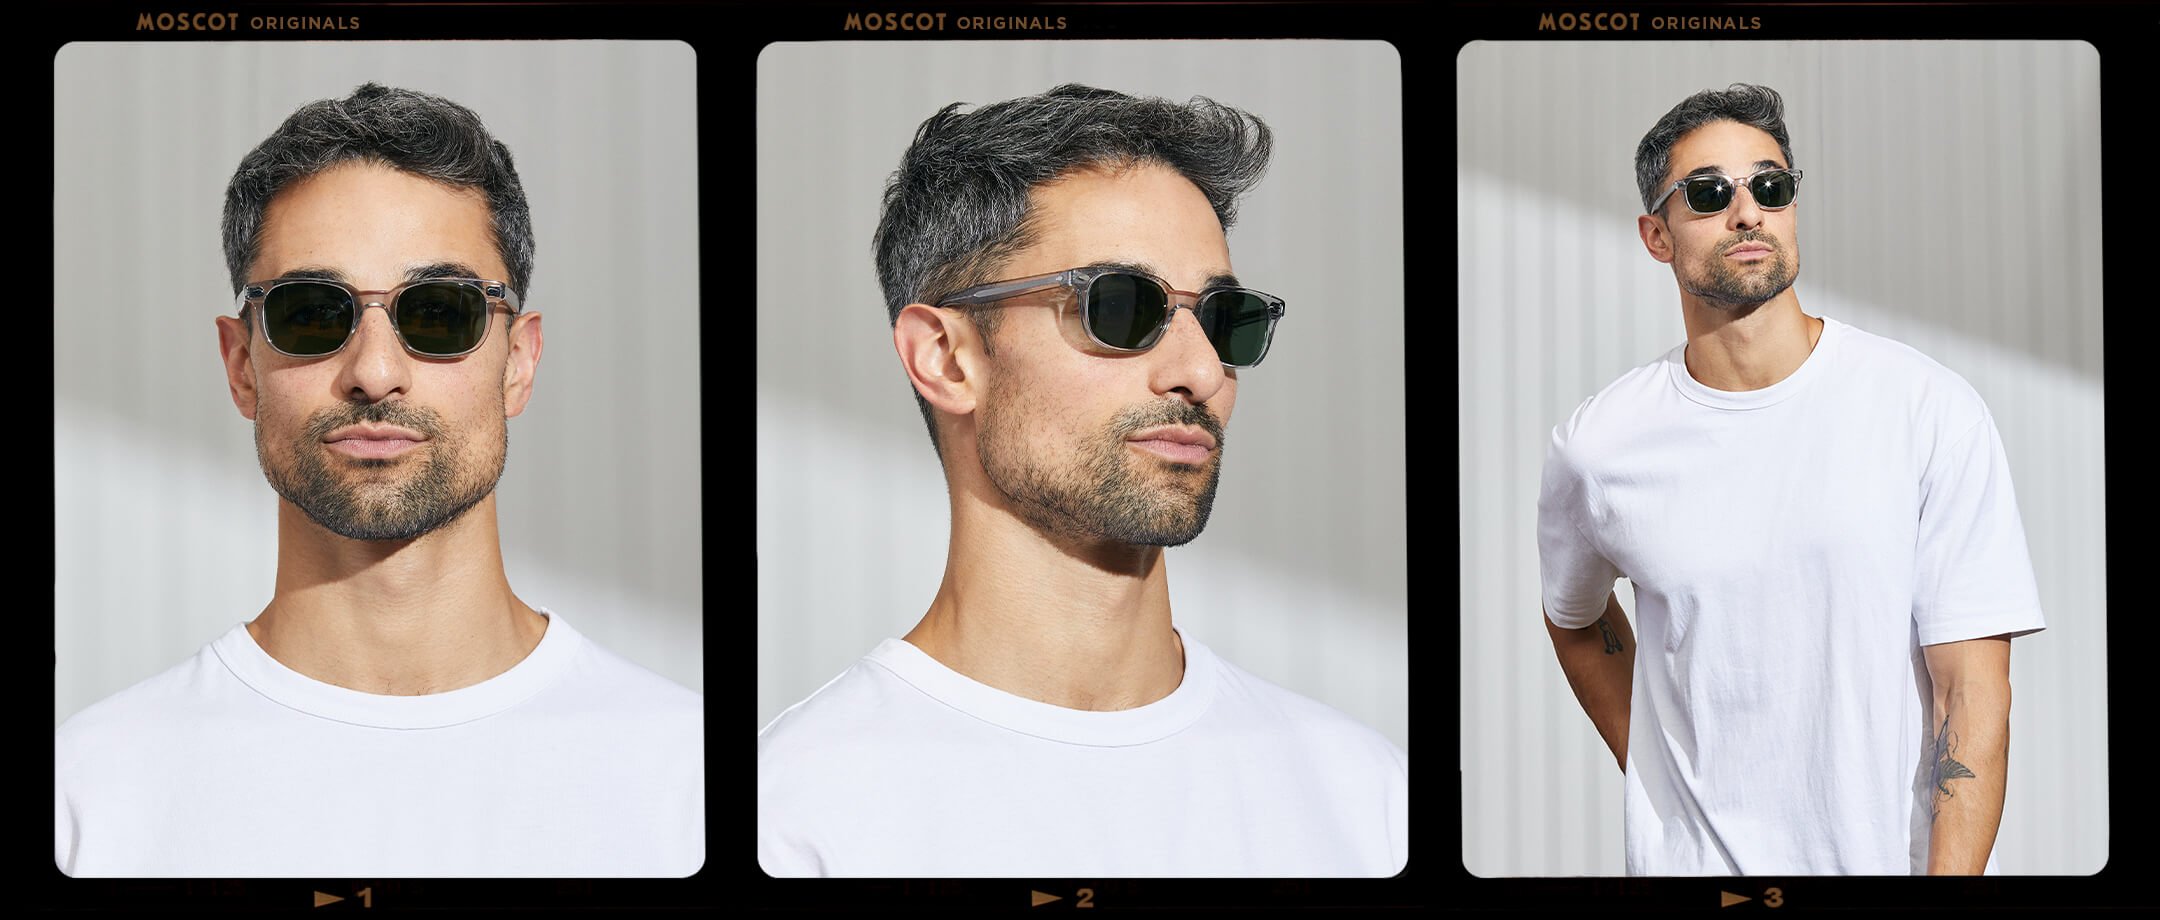 Model is wearing The BOYCHIK SUN in Light Grey in size 49 with G-15 Glass Lenses